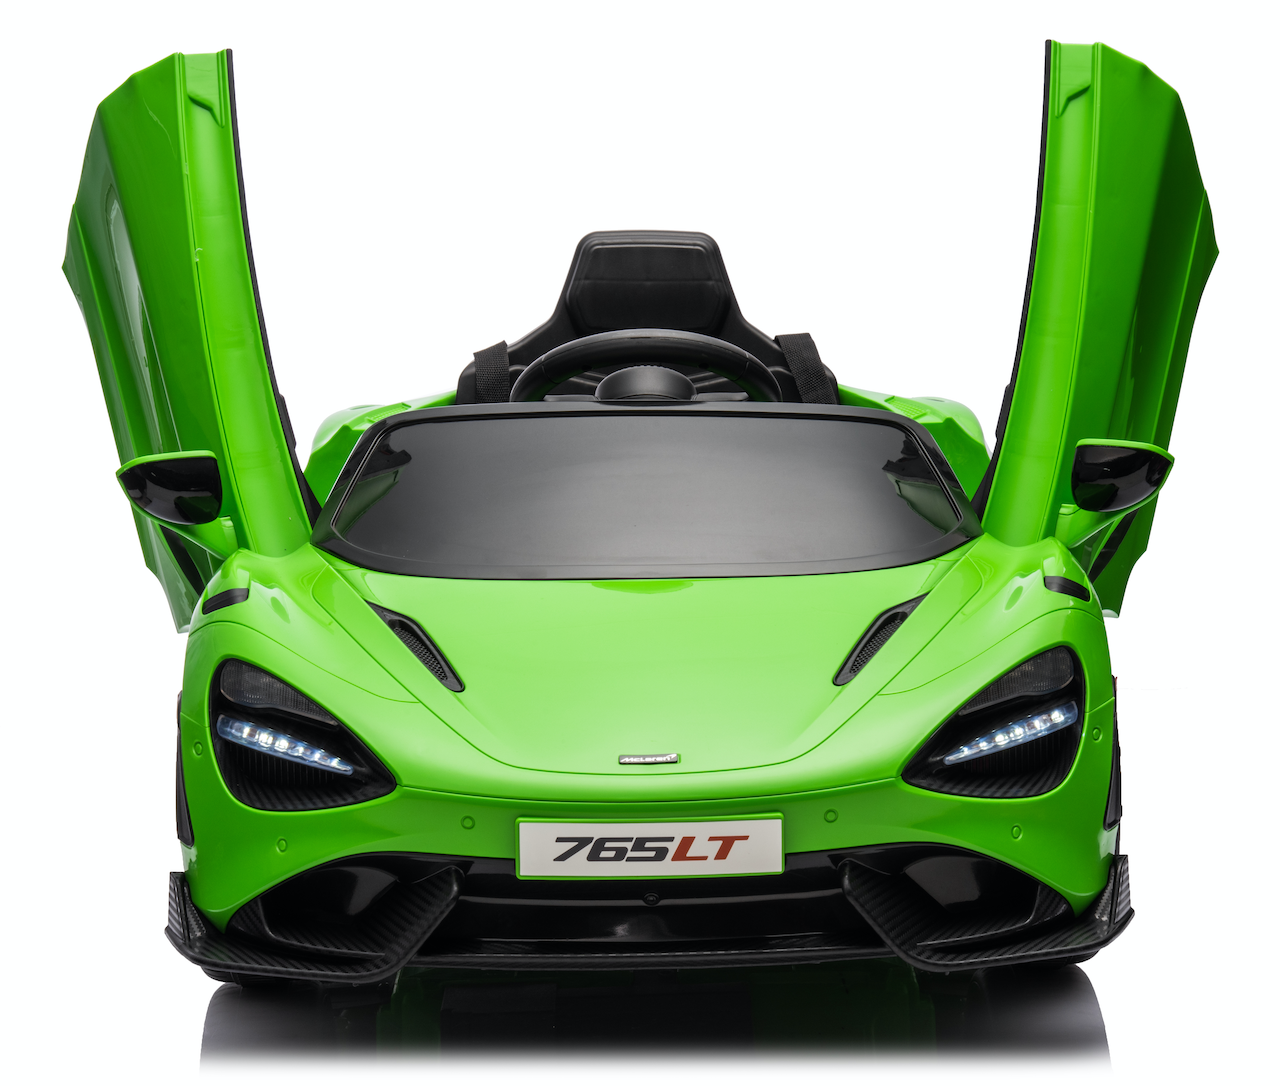 Mclaren 765LT Electric 12V Kids Ride on Toy Car With Remote - Green